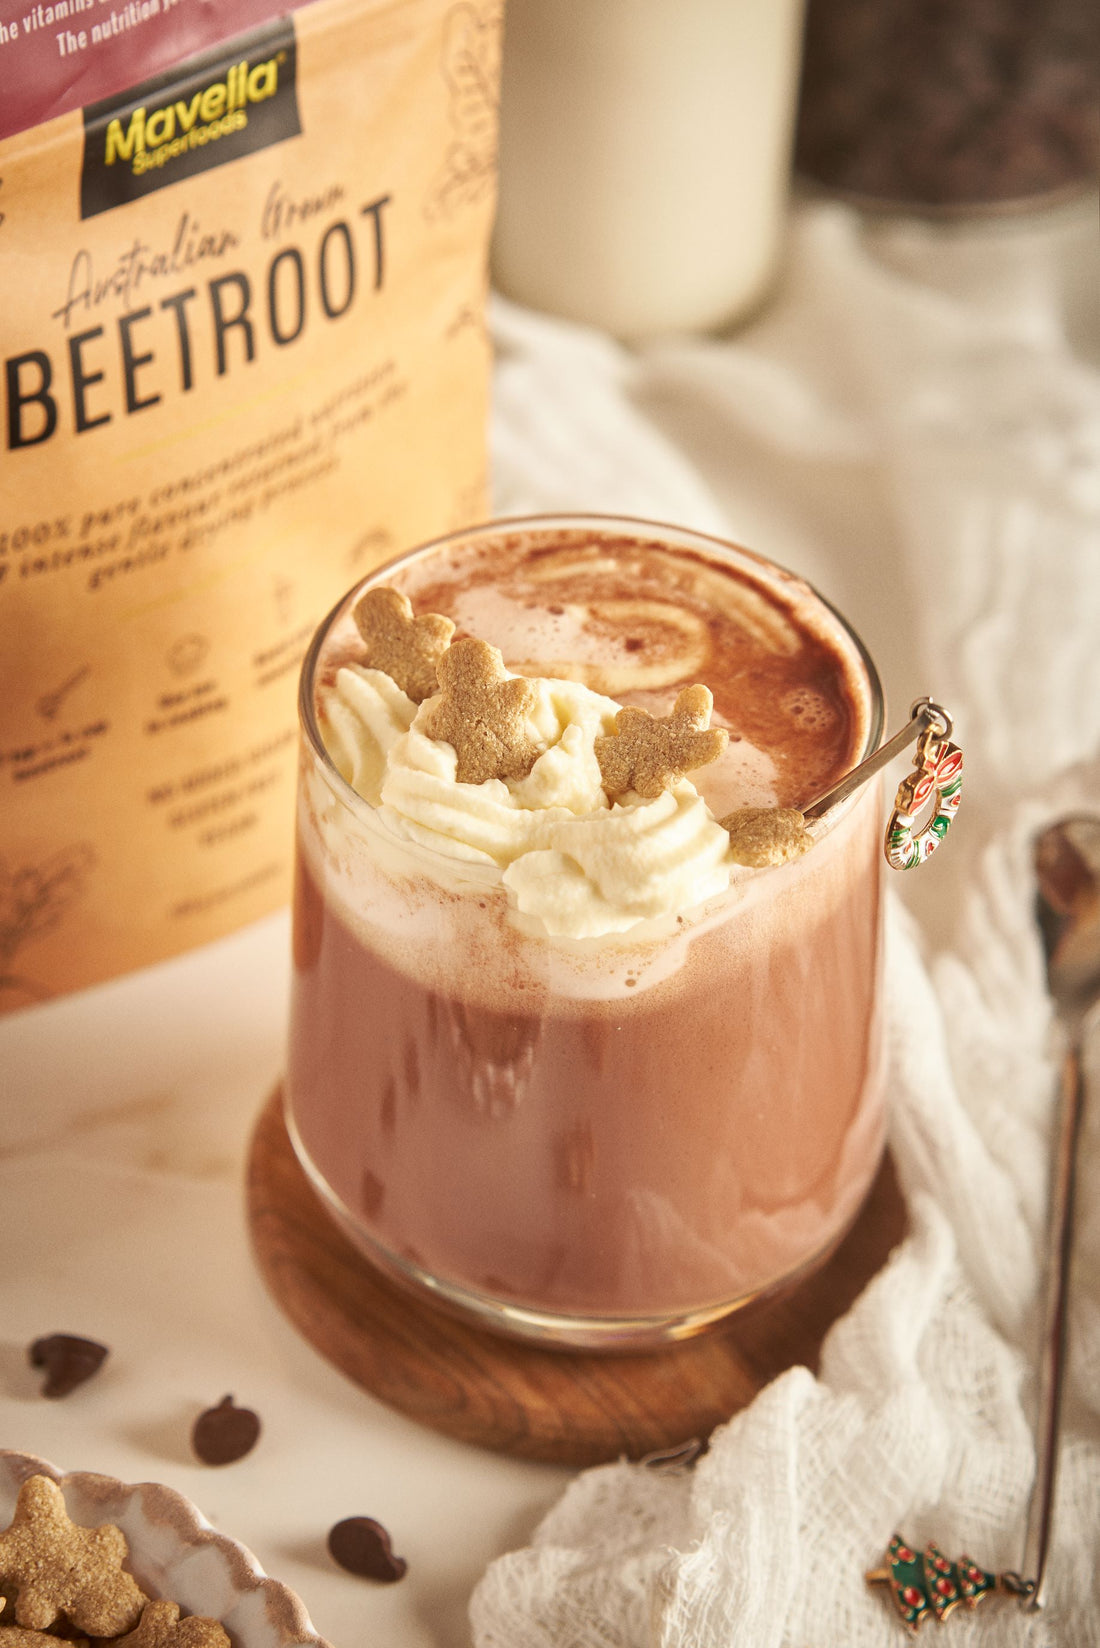 Gingerbread-Beetroot Hot Cocoa